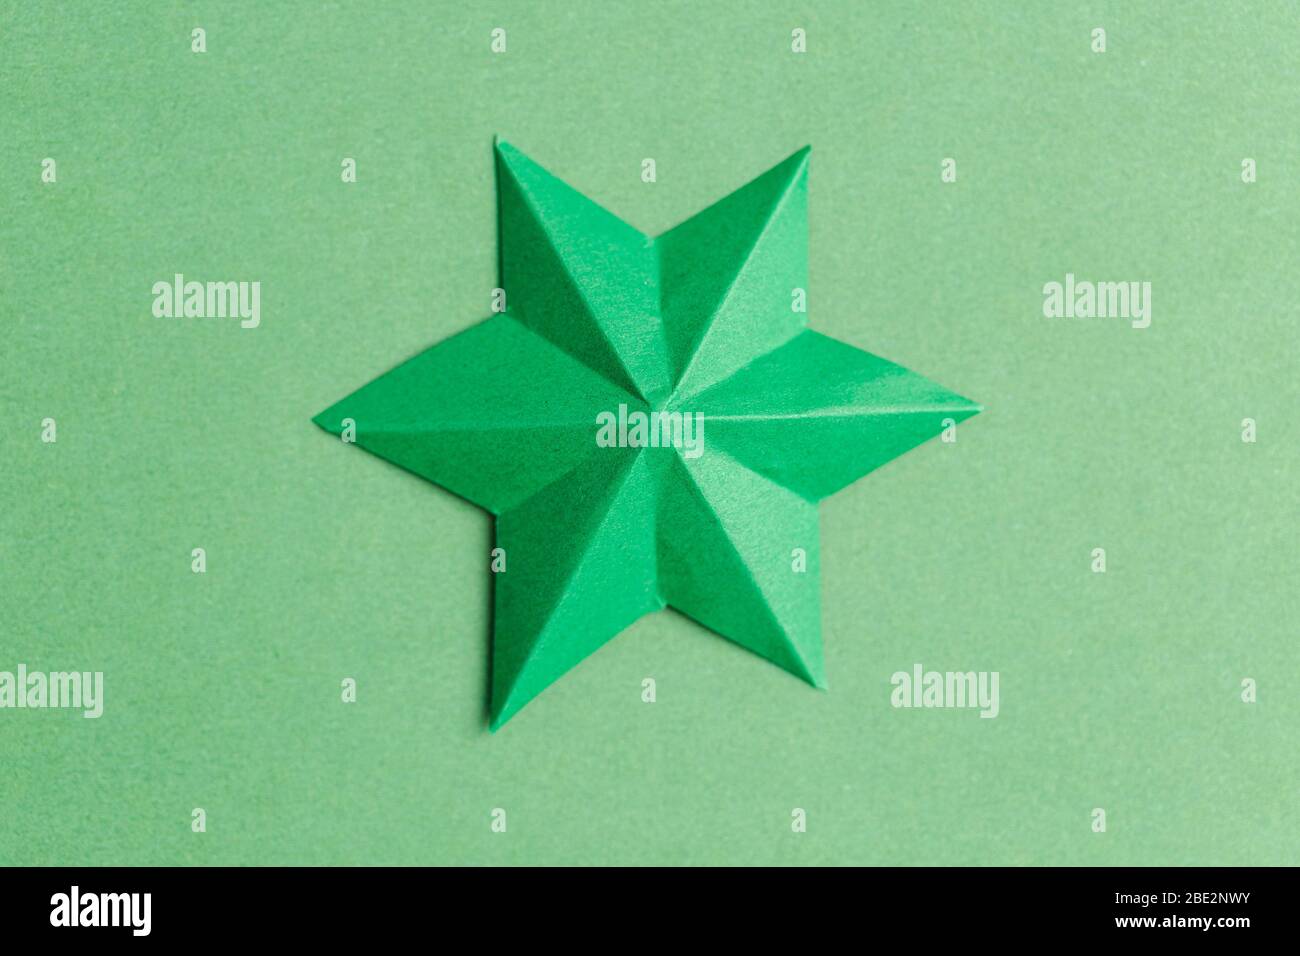 Green paper star over green background Stock Photo